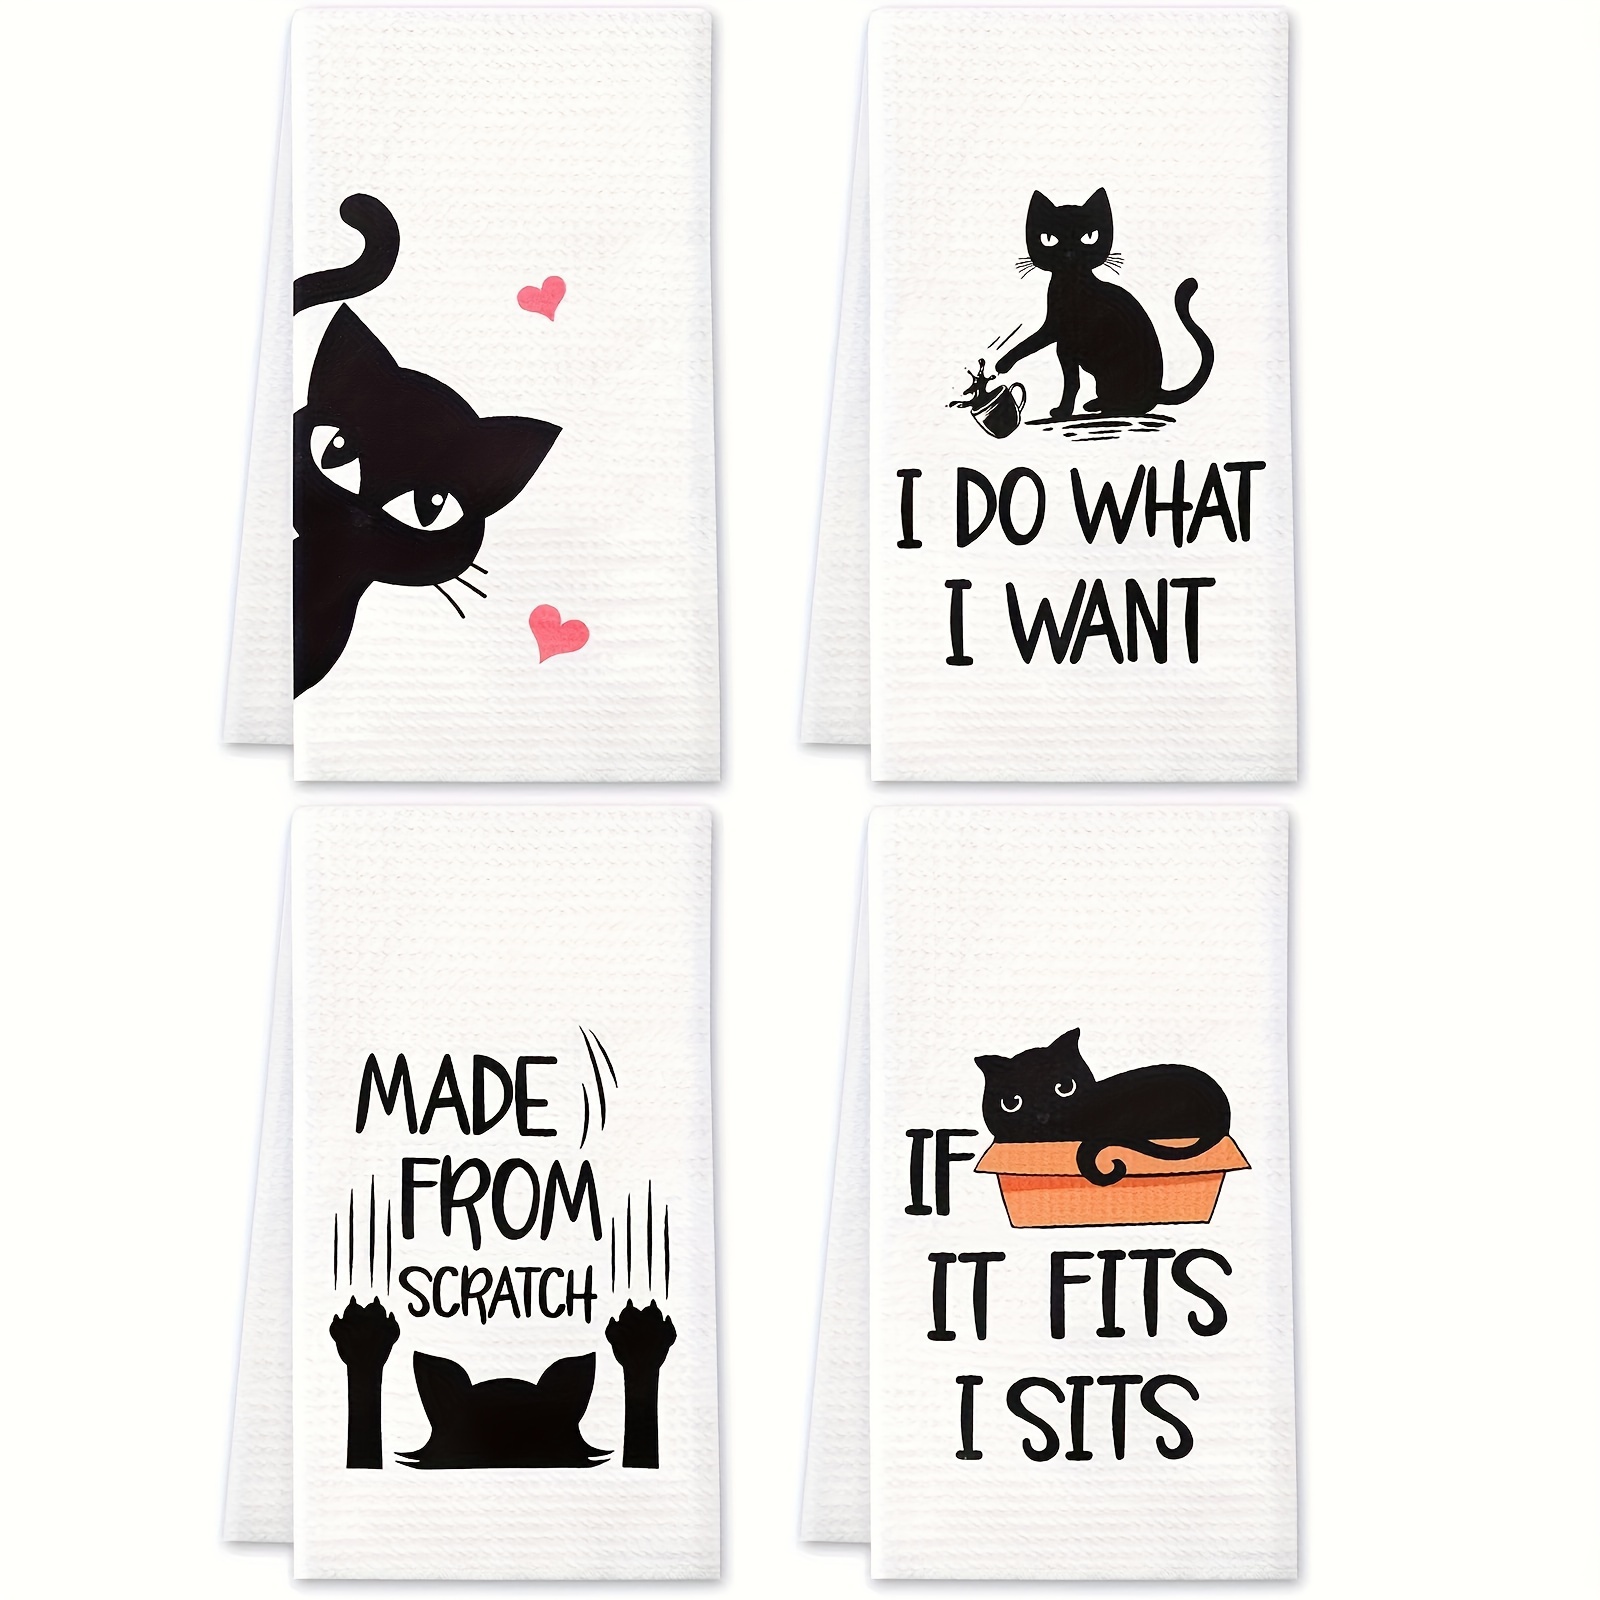 

4pcs Funny Cat Kitchen Towels, Housewarming Gifts, Cat Lover, Gifts Tea Towels, Decorative Polyester Dish Towels, Fun Hostess Kitchen Decor, Wedding Shower Gift, Housewarming Presents